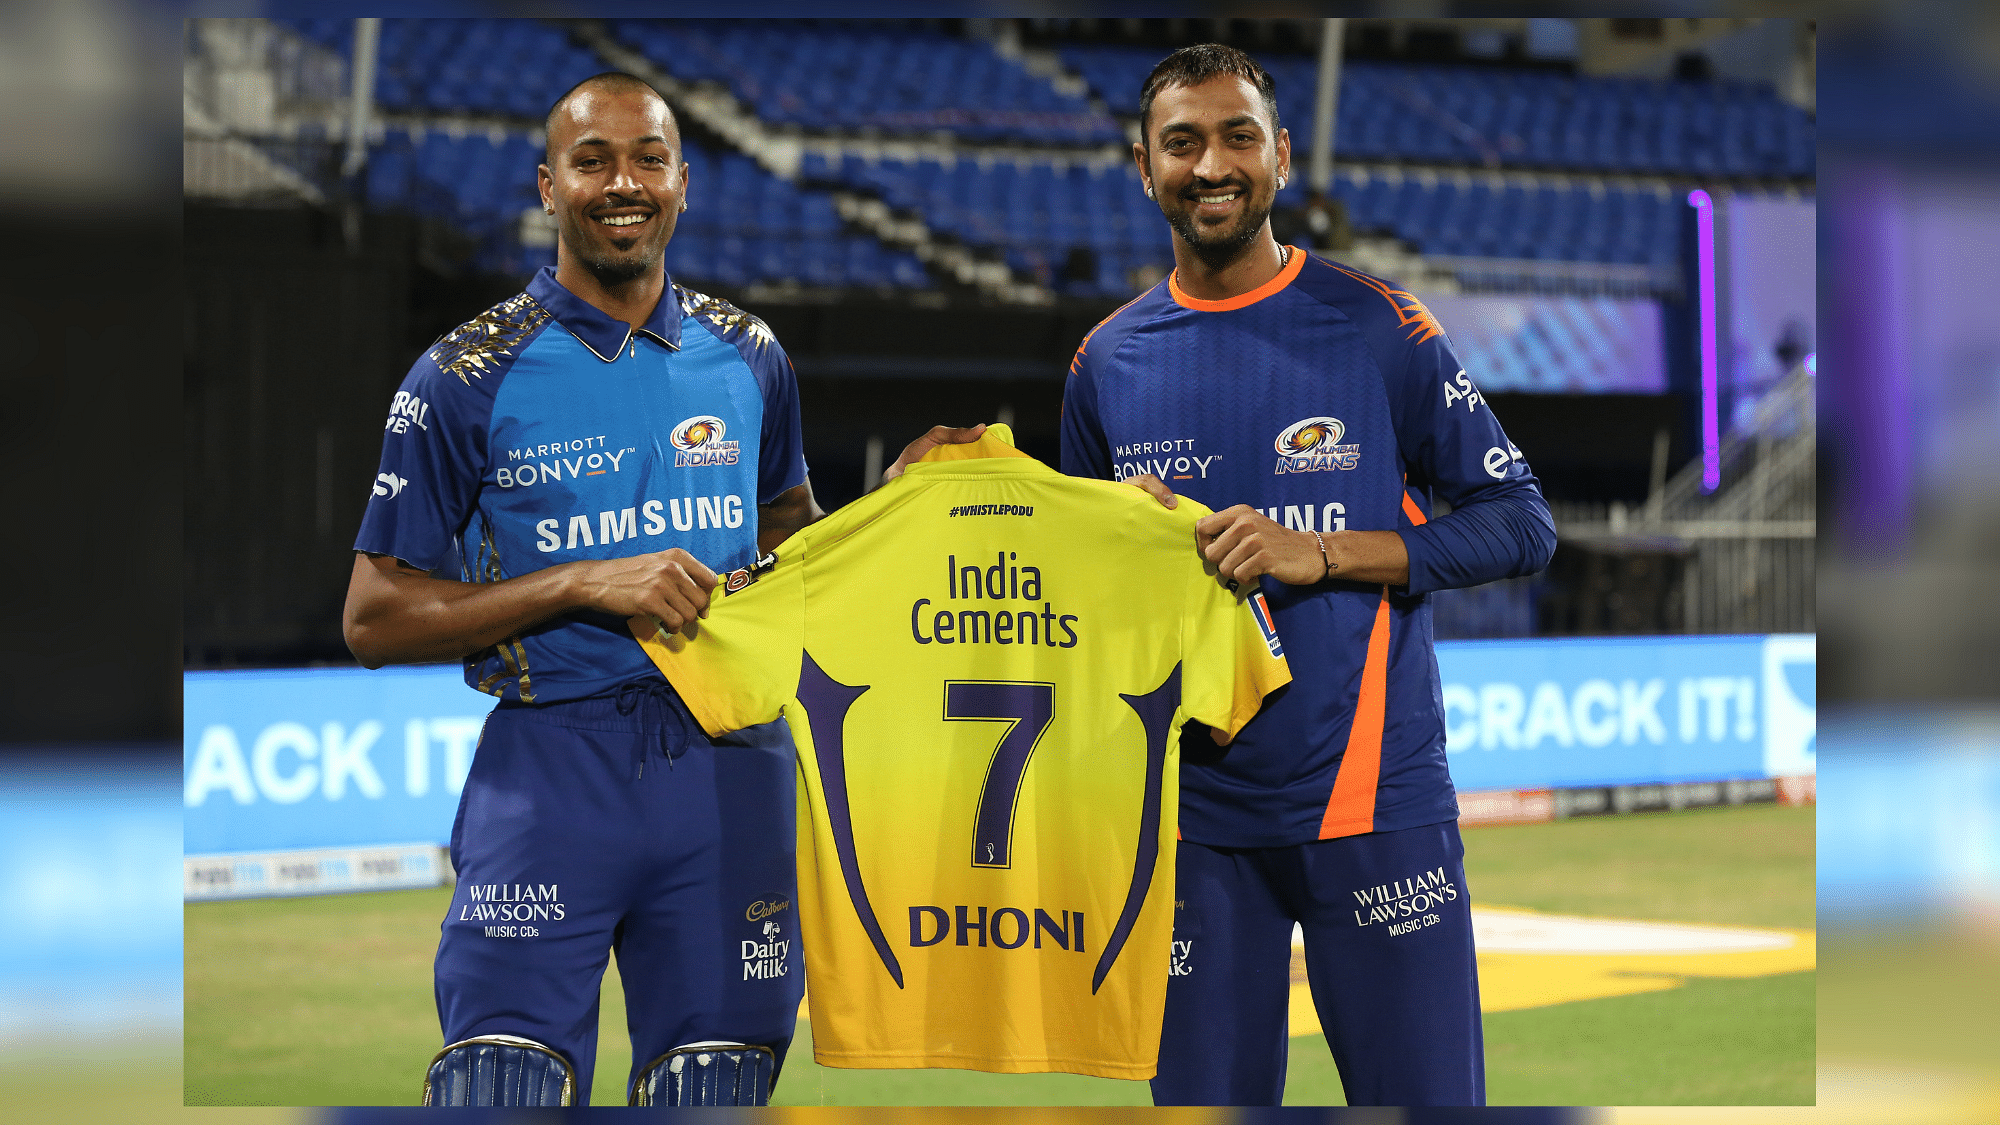 jersey number of dhoni